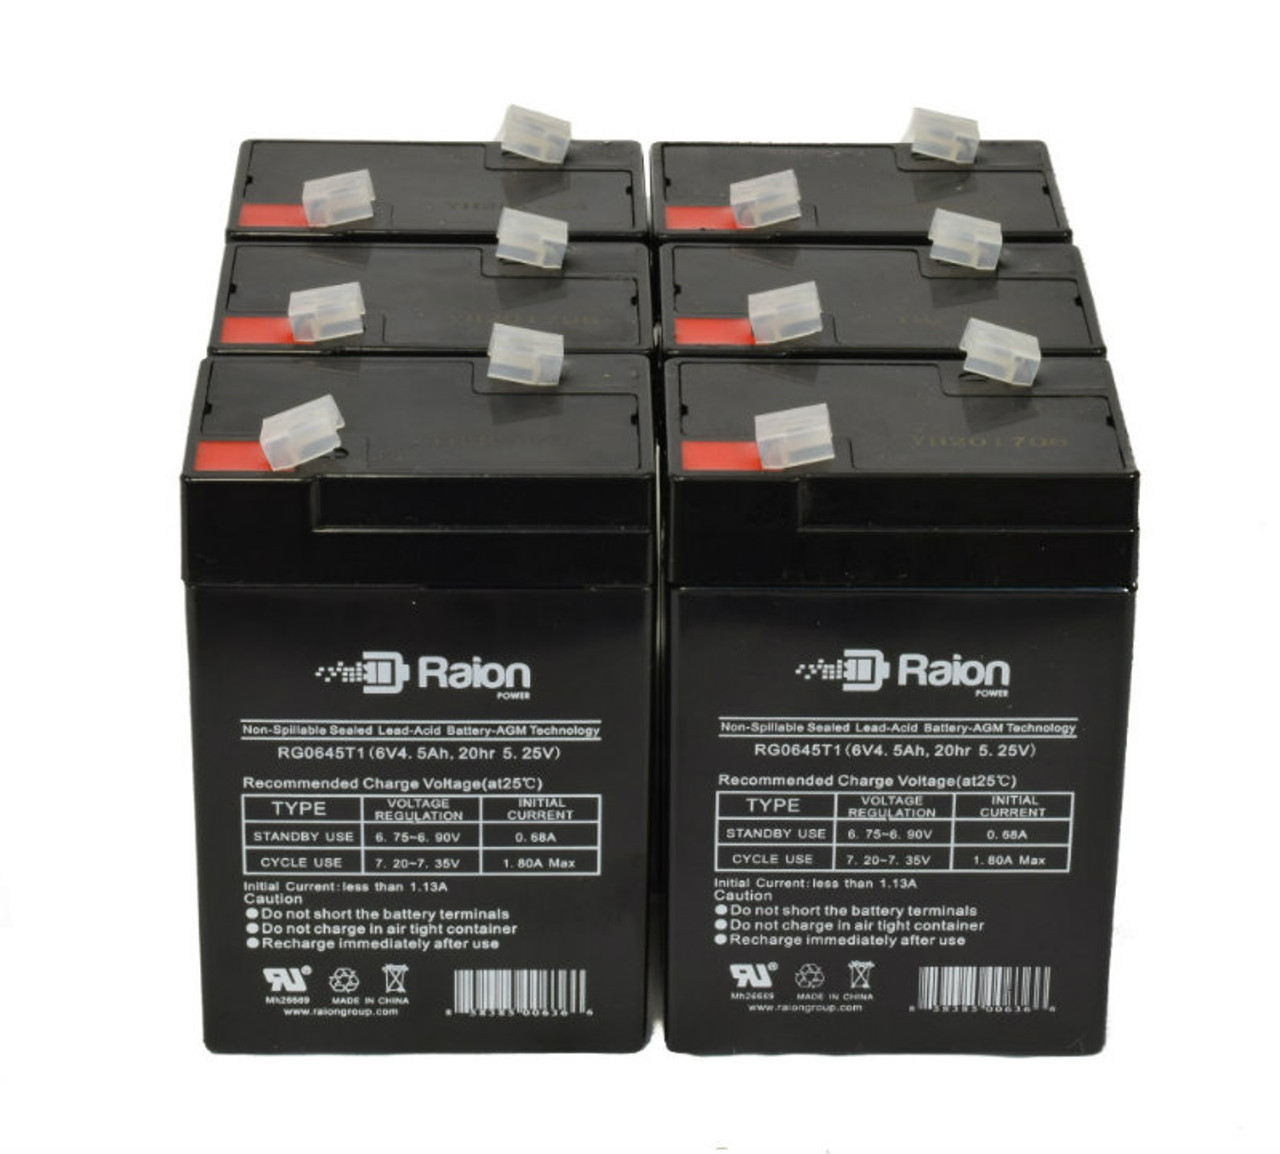 Raion Power 6 Volt 4.5Ah RG0645T1 Replacement Battery for Eastar FM640 - 6 Pack